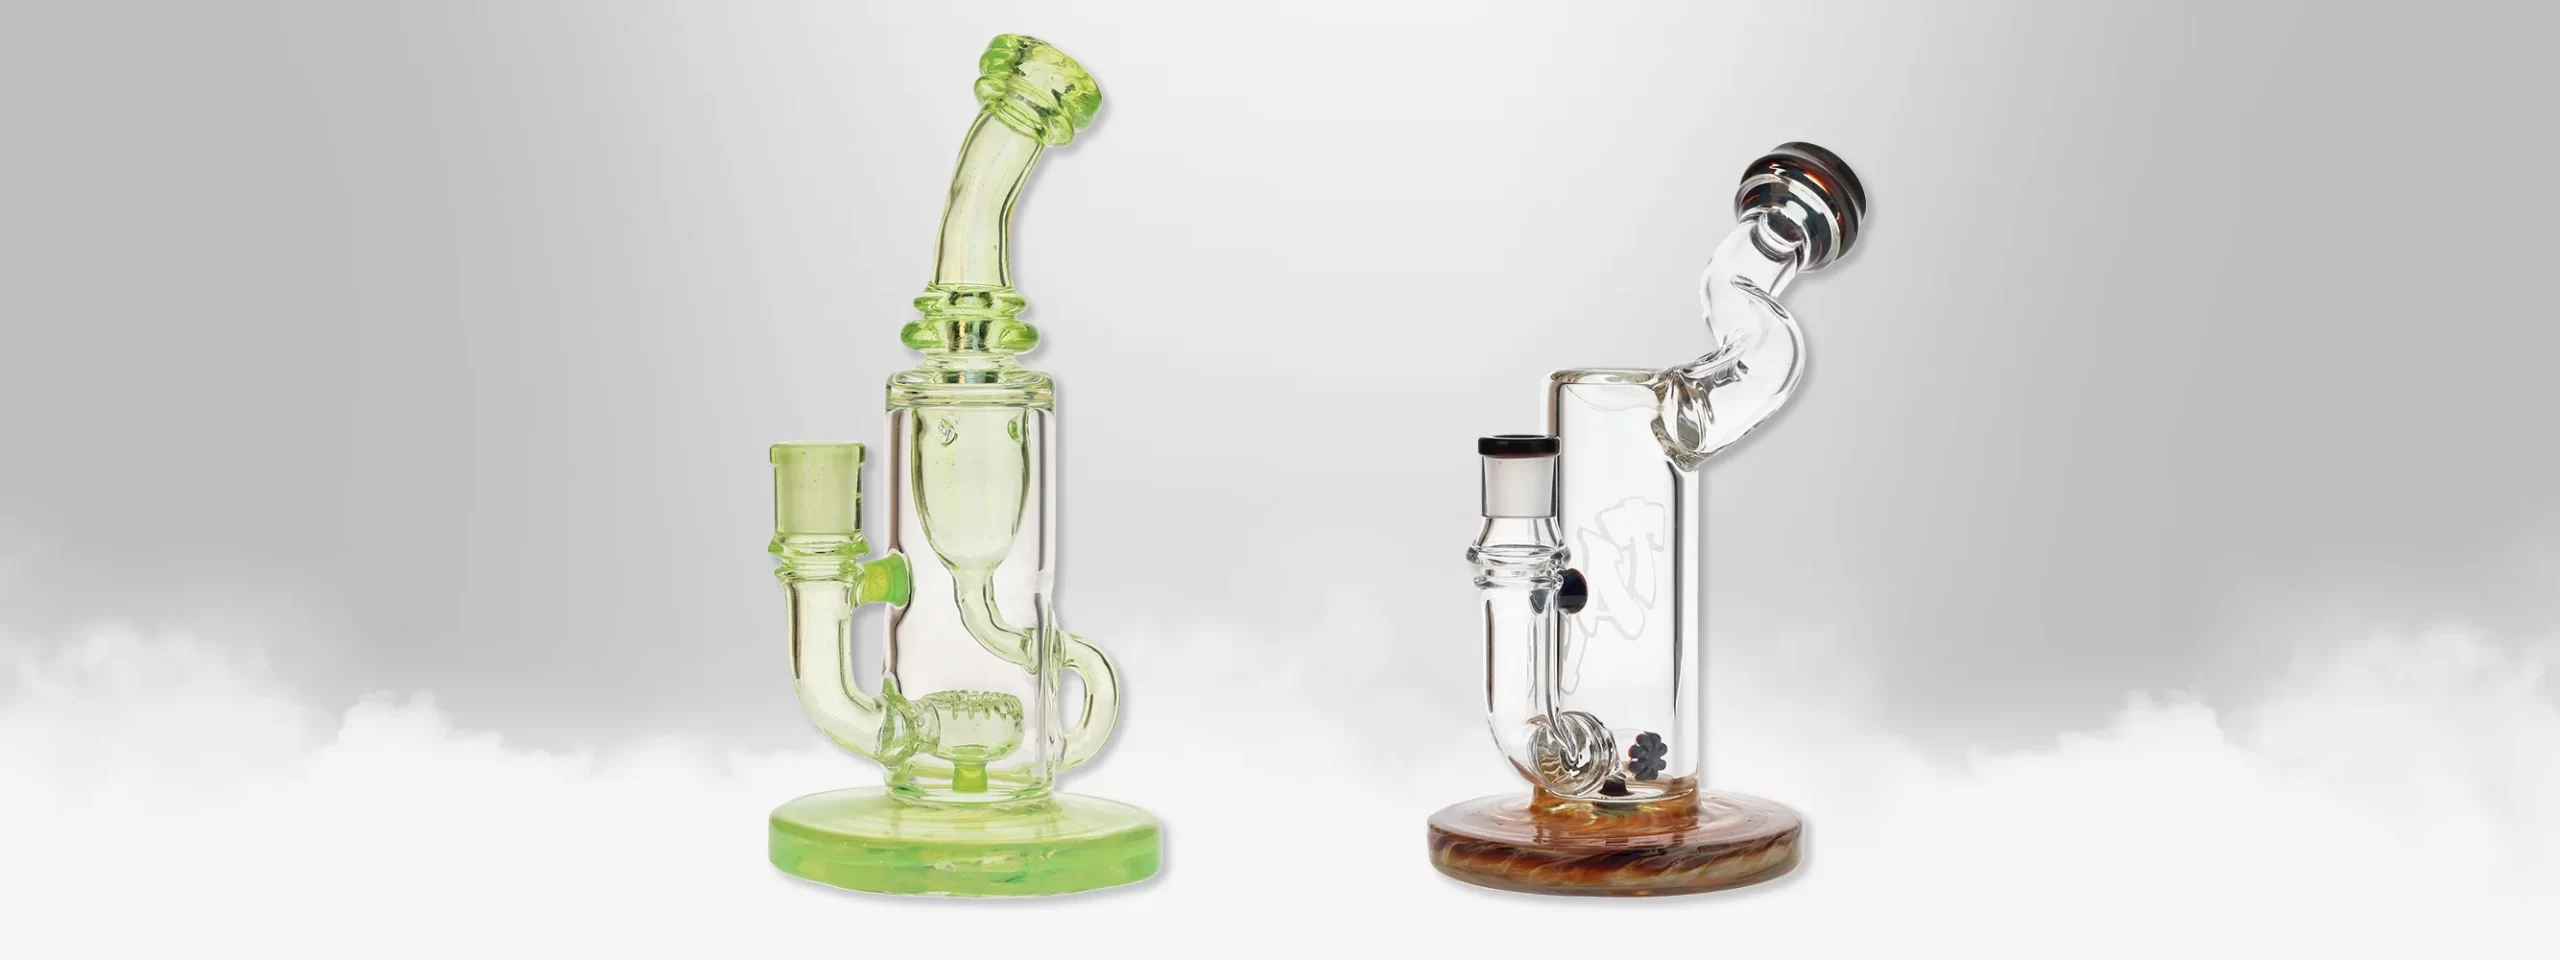 Everything You Need to Know About Rick & Morty Bongs